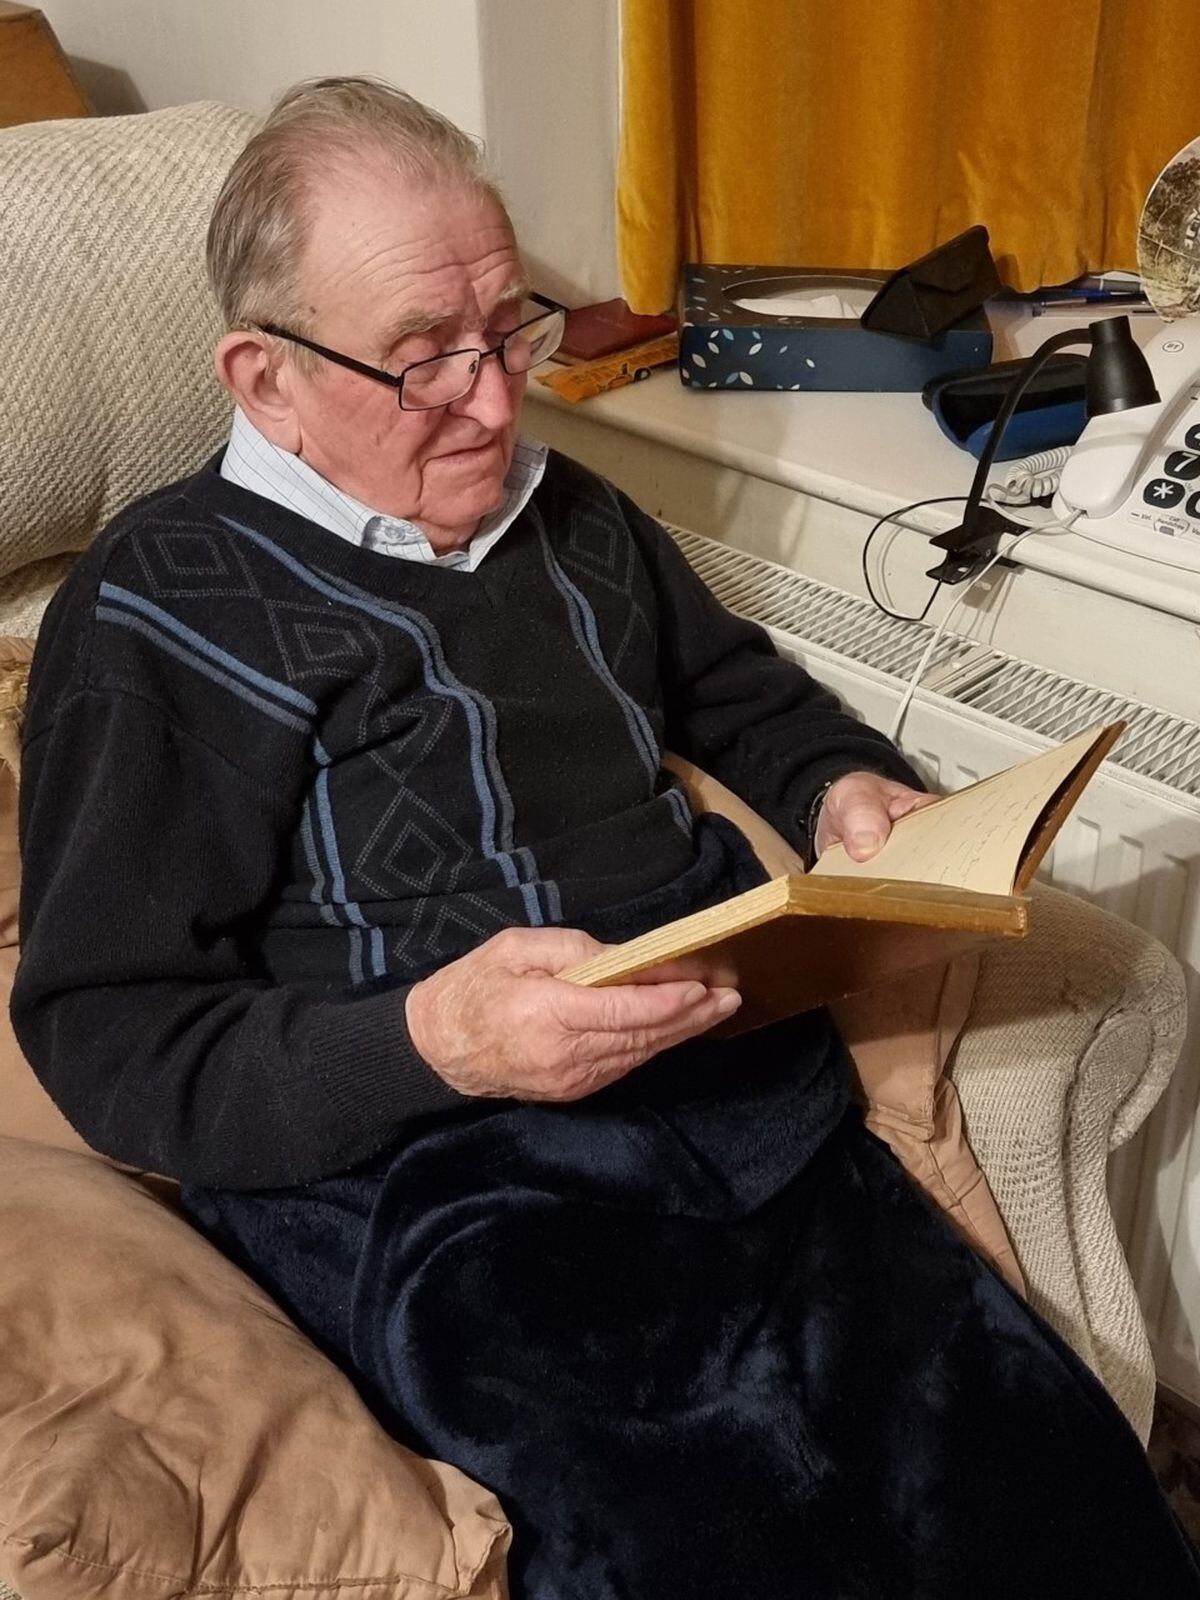 John Whittingham pictured at home reading a first edition of Captain Geoffrey Dugdale's book: 'Langemark' and 'Cambrai' - A War Narrative 1914-1918